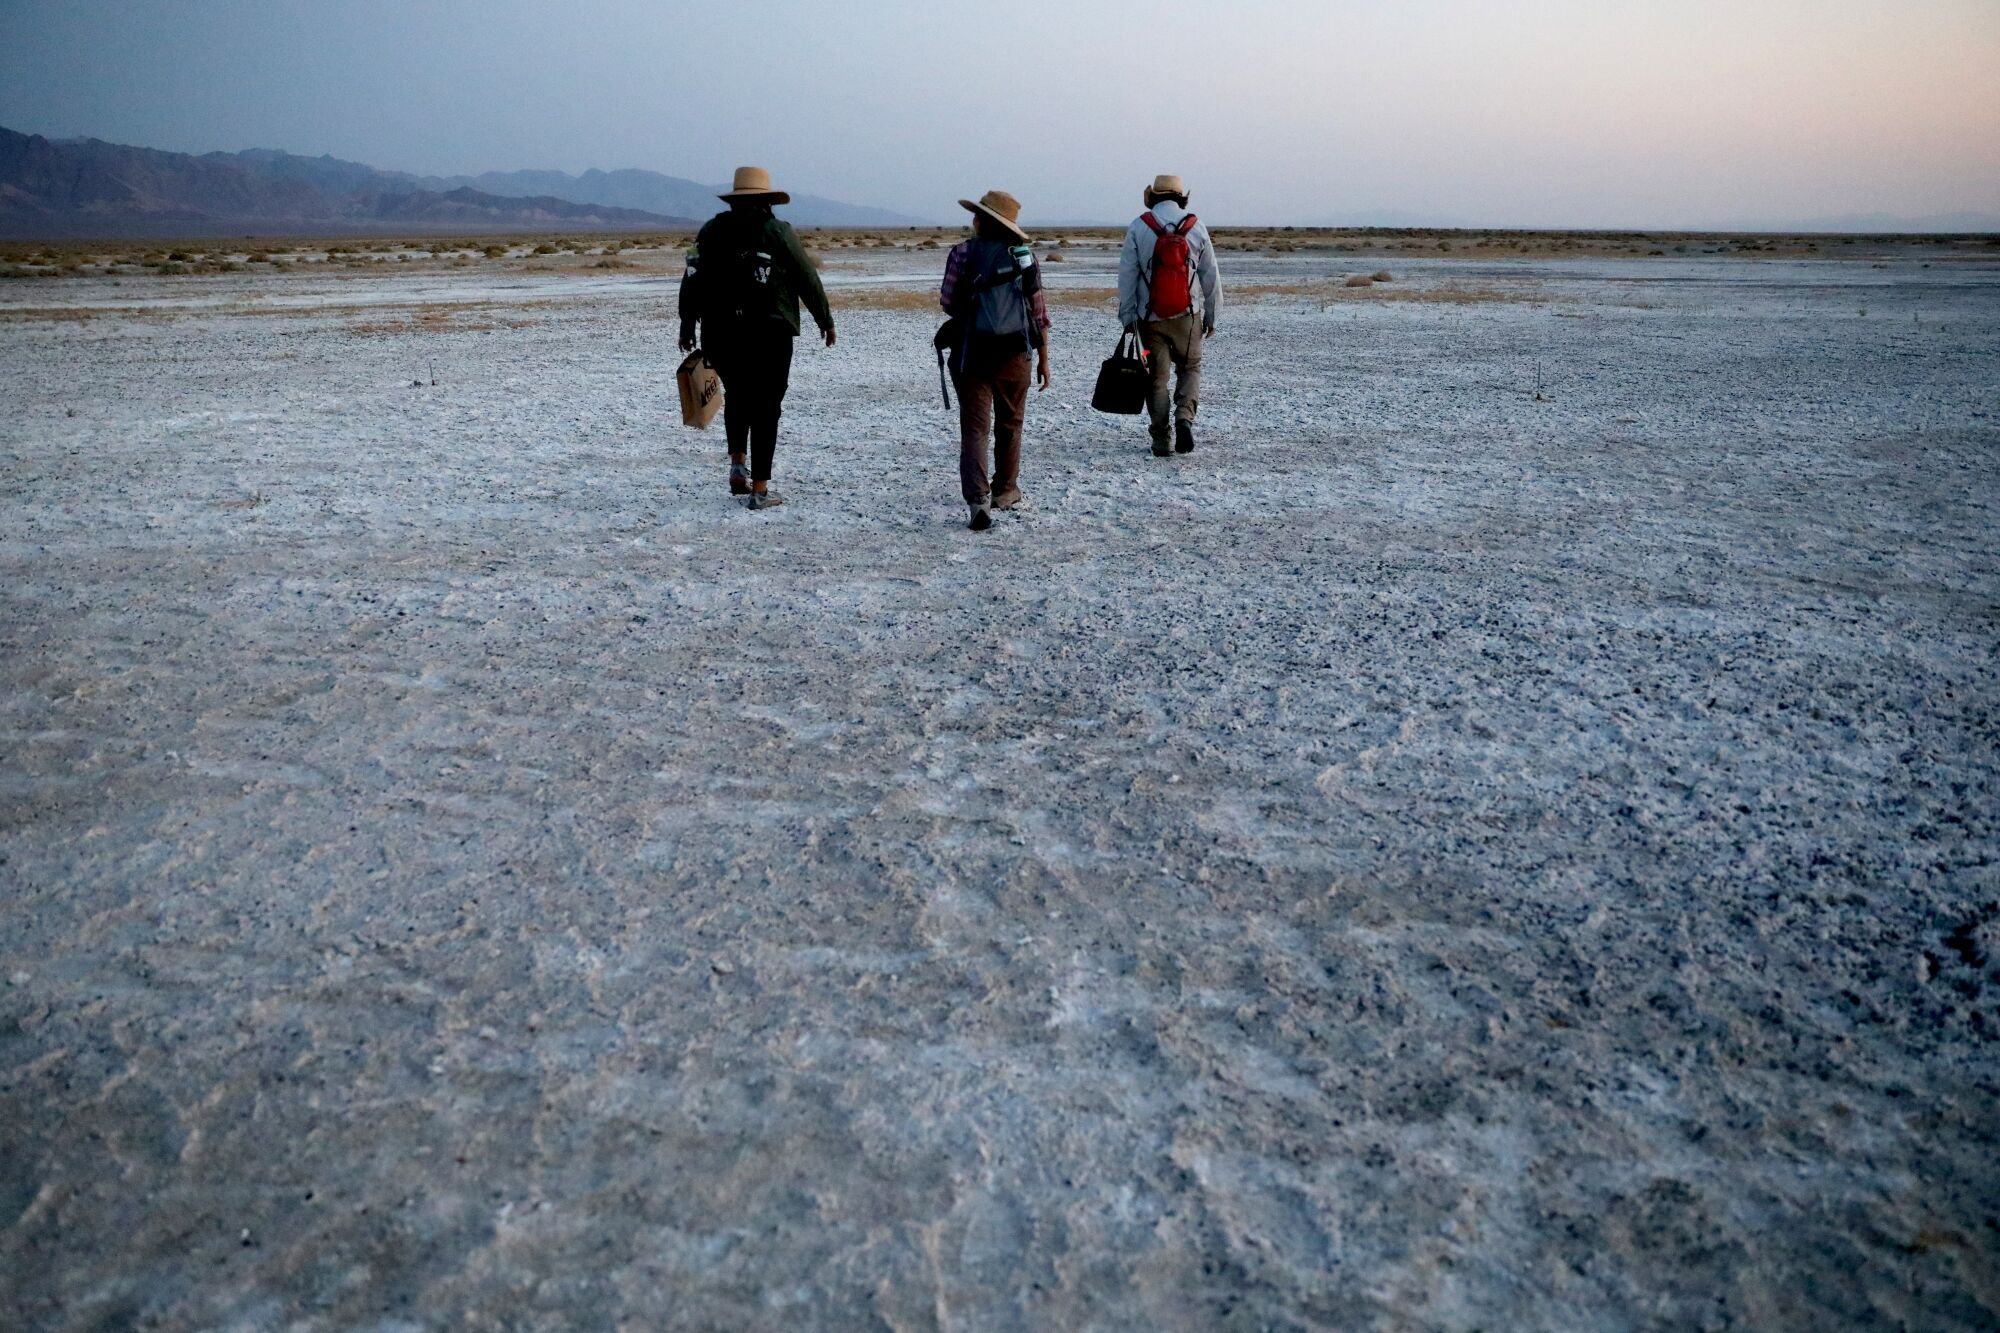 Three people trudge over a craggy desert plain